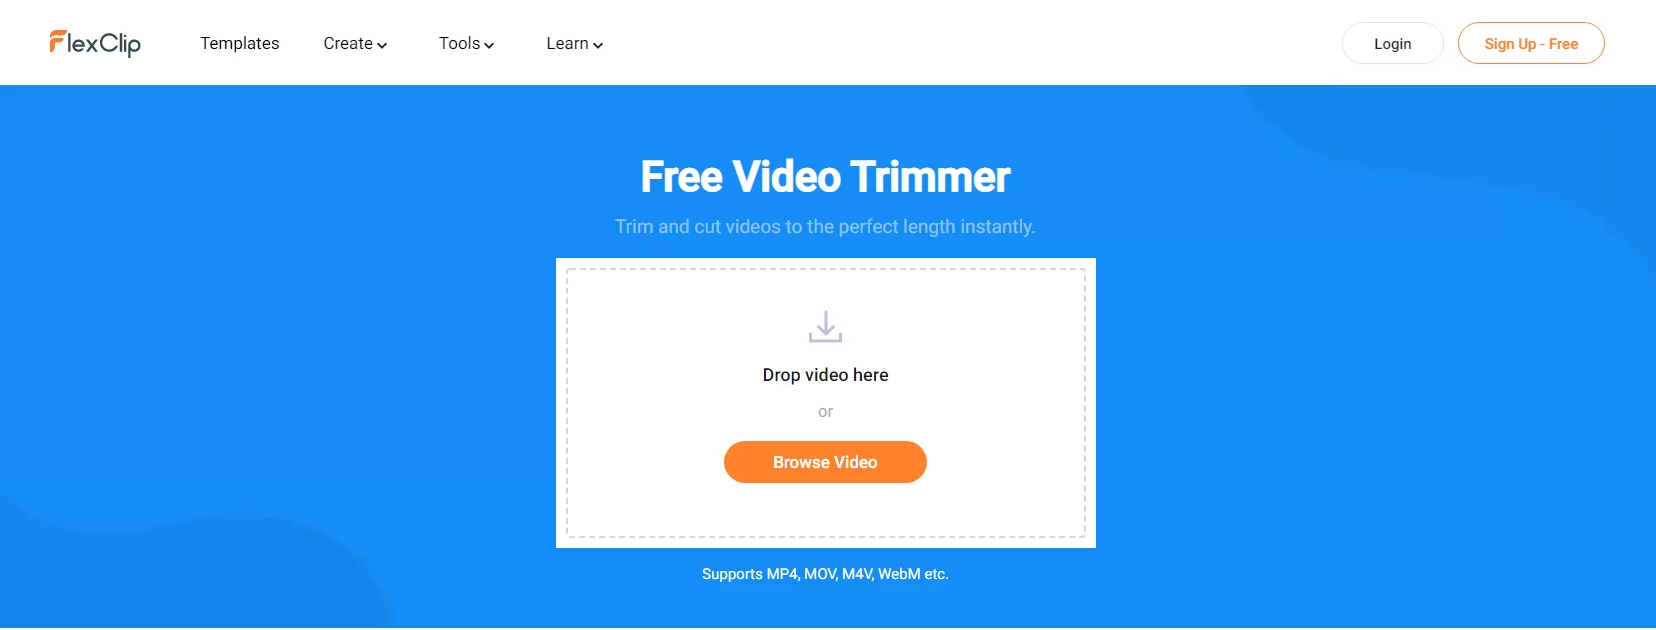 How FlexClip Free Video Trimmer Works